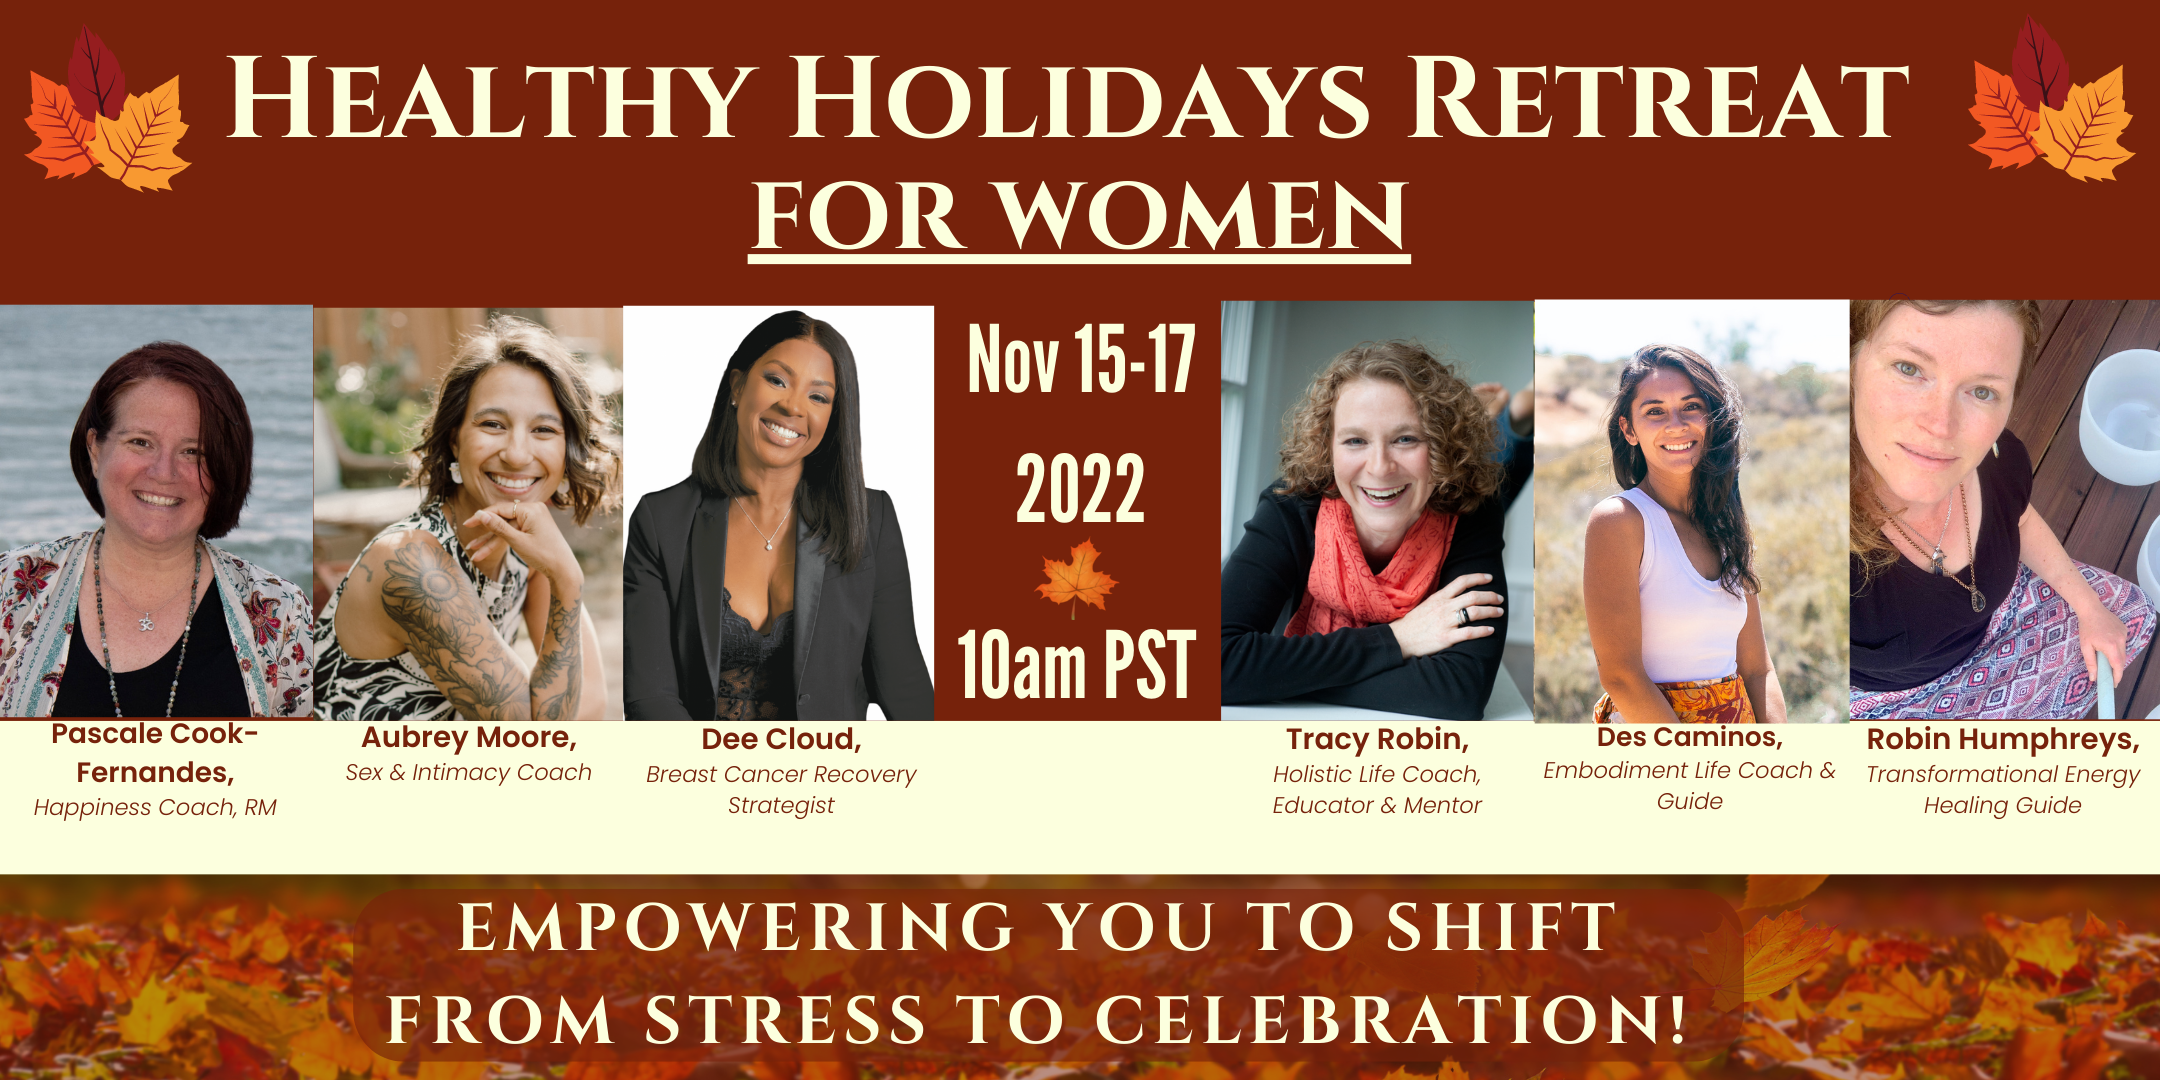 <h1 class="tribe-events-single-event-title">Healthy Holidays Retreat For Women:Empowering You to Shift From Stress to Celebration</h1>